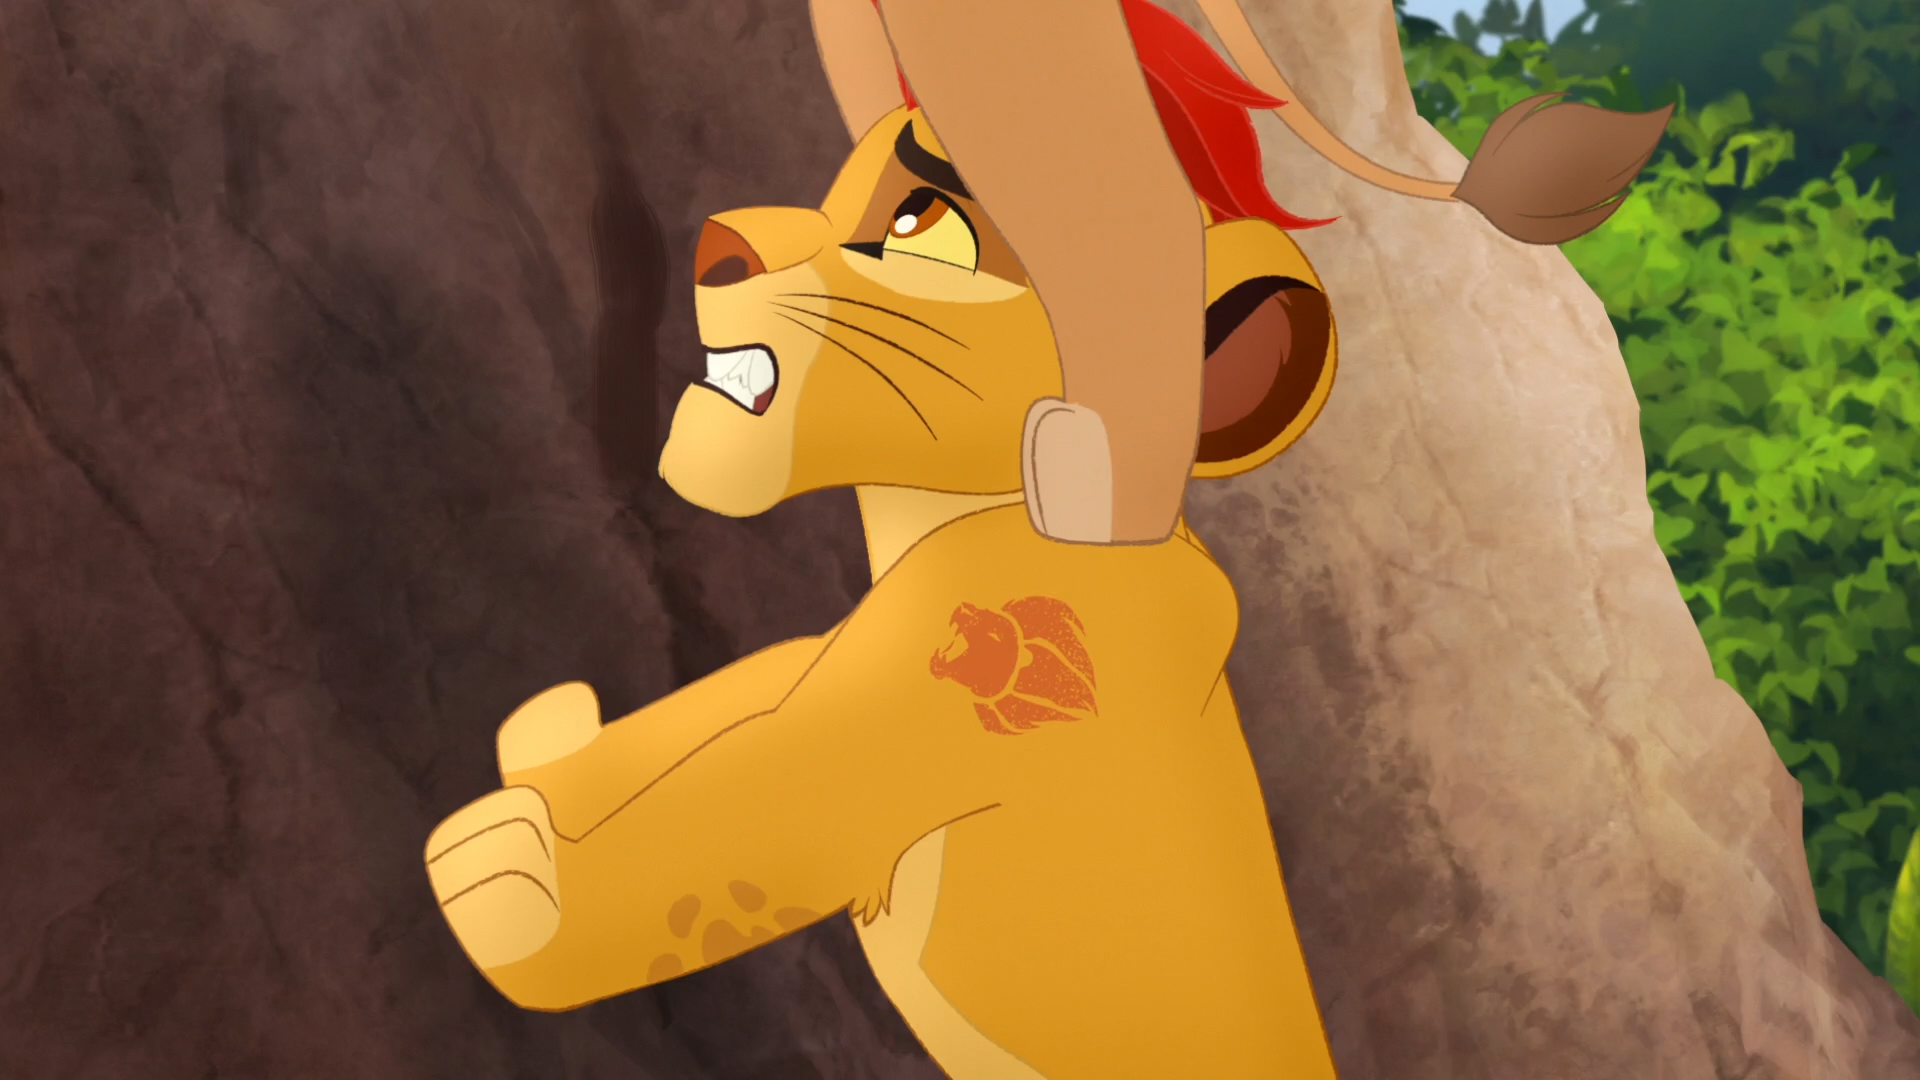 Image 2017 01 08 20 34 23png The Lion King Wiki Fandom Powered By Wikia 